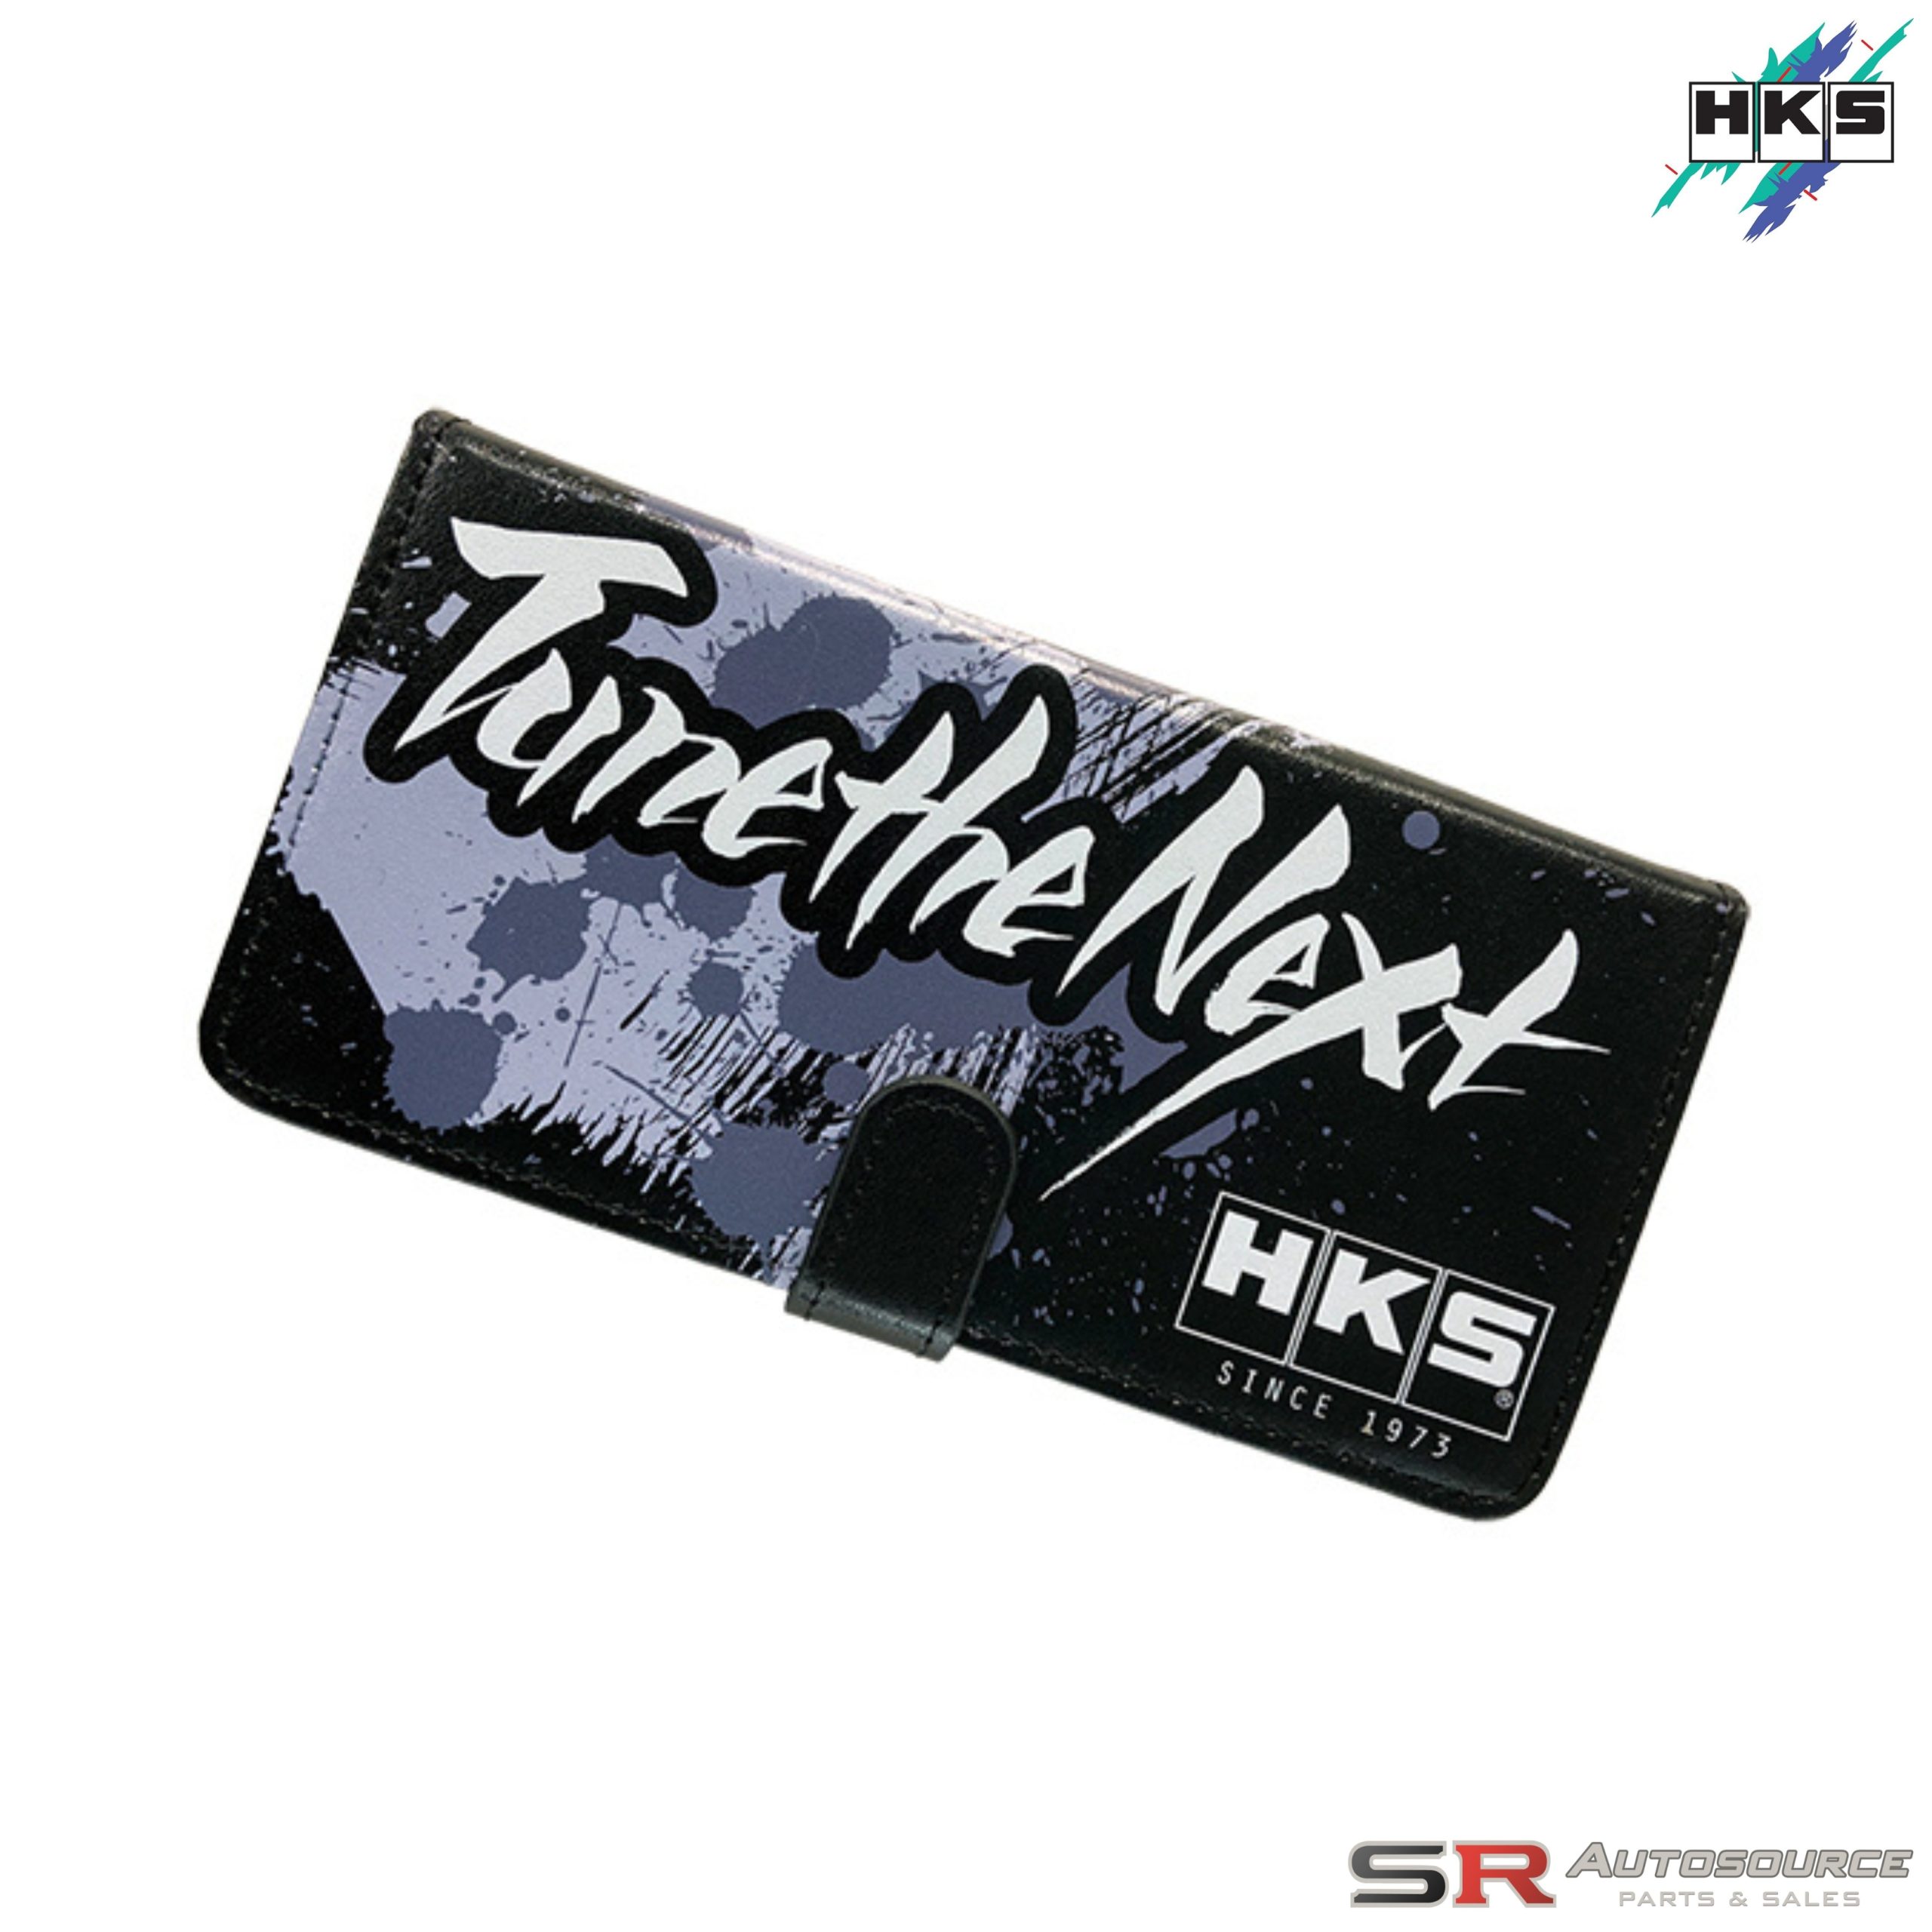 HKS Limited Edition ‘Tune the Next’ Phone Cover